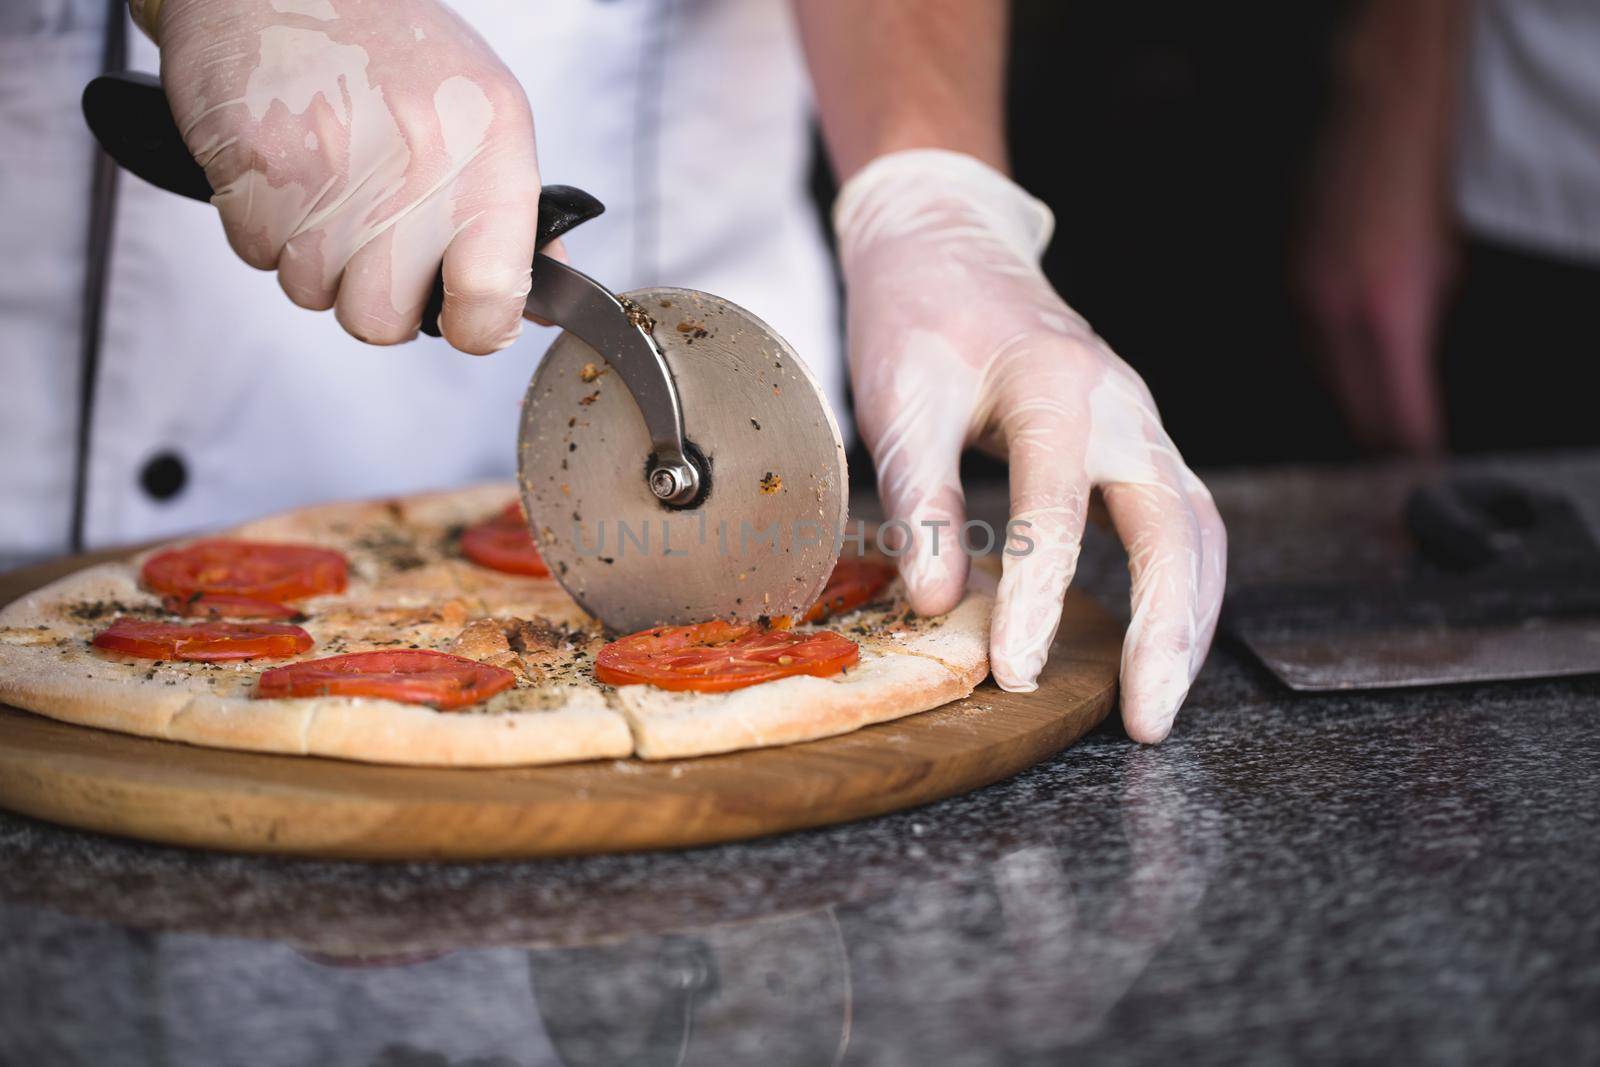 The cook cuts pizza with a round knife by StudioPeace